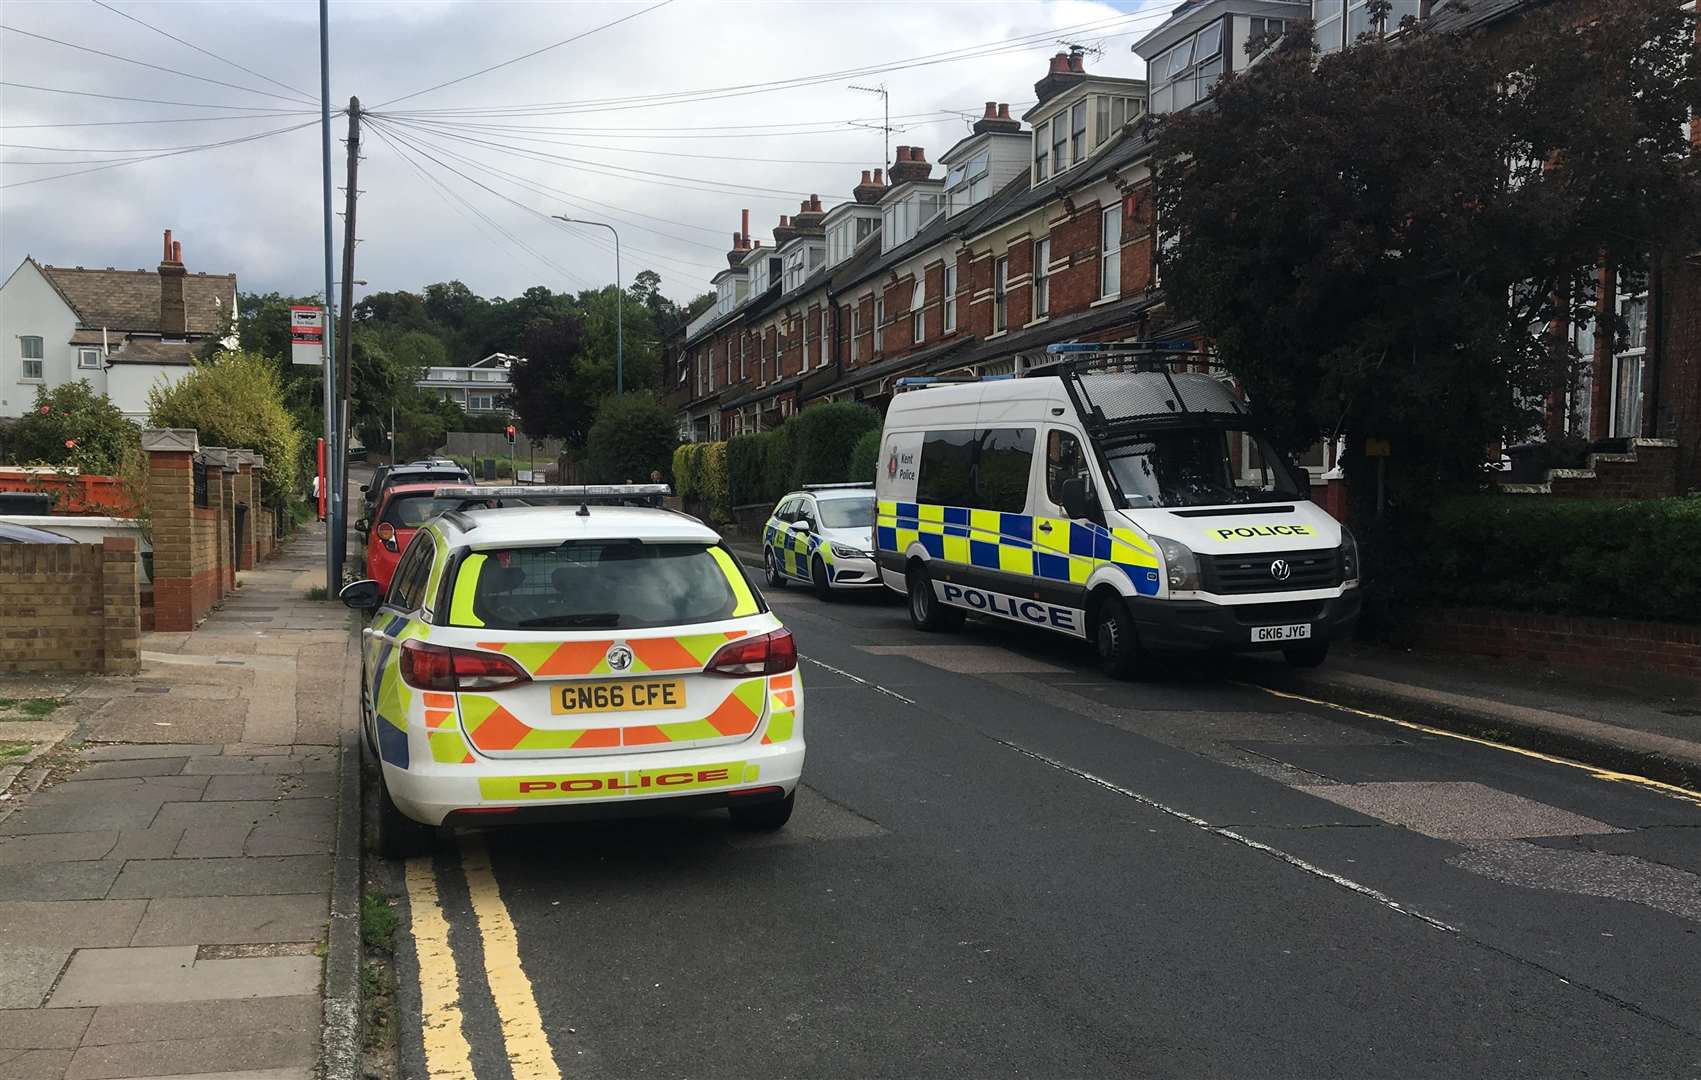 Police are thought to have raided a property on Old Road East in Gravesend